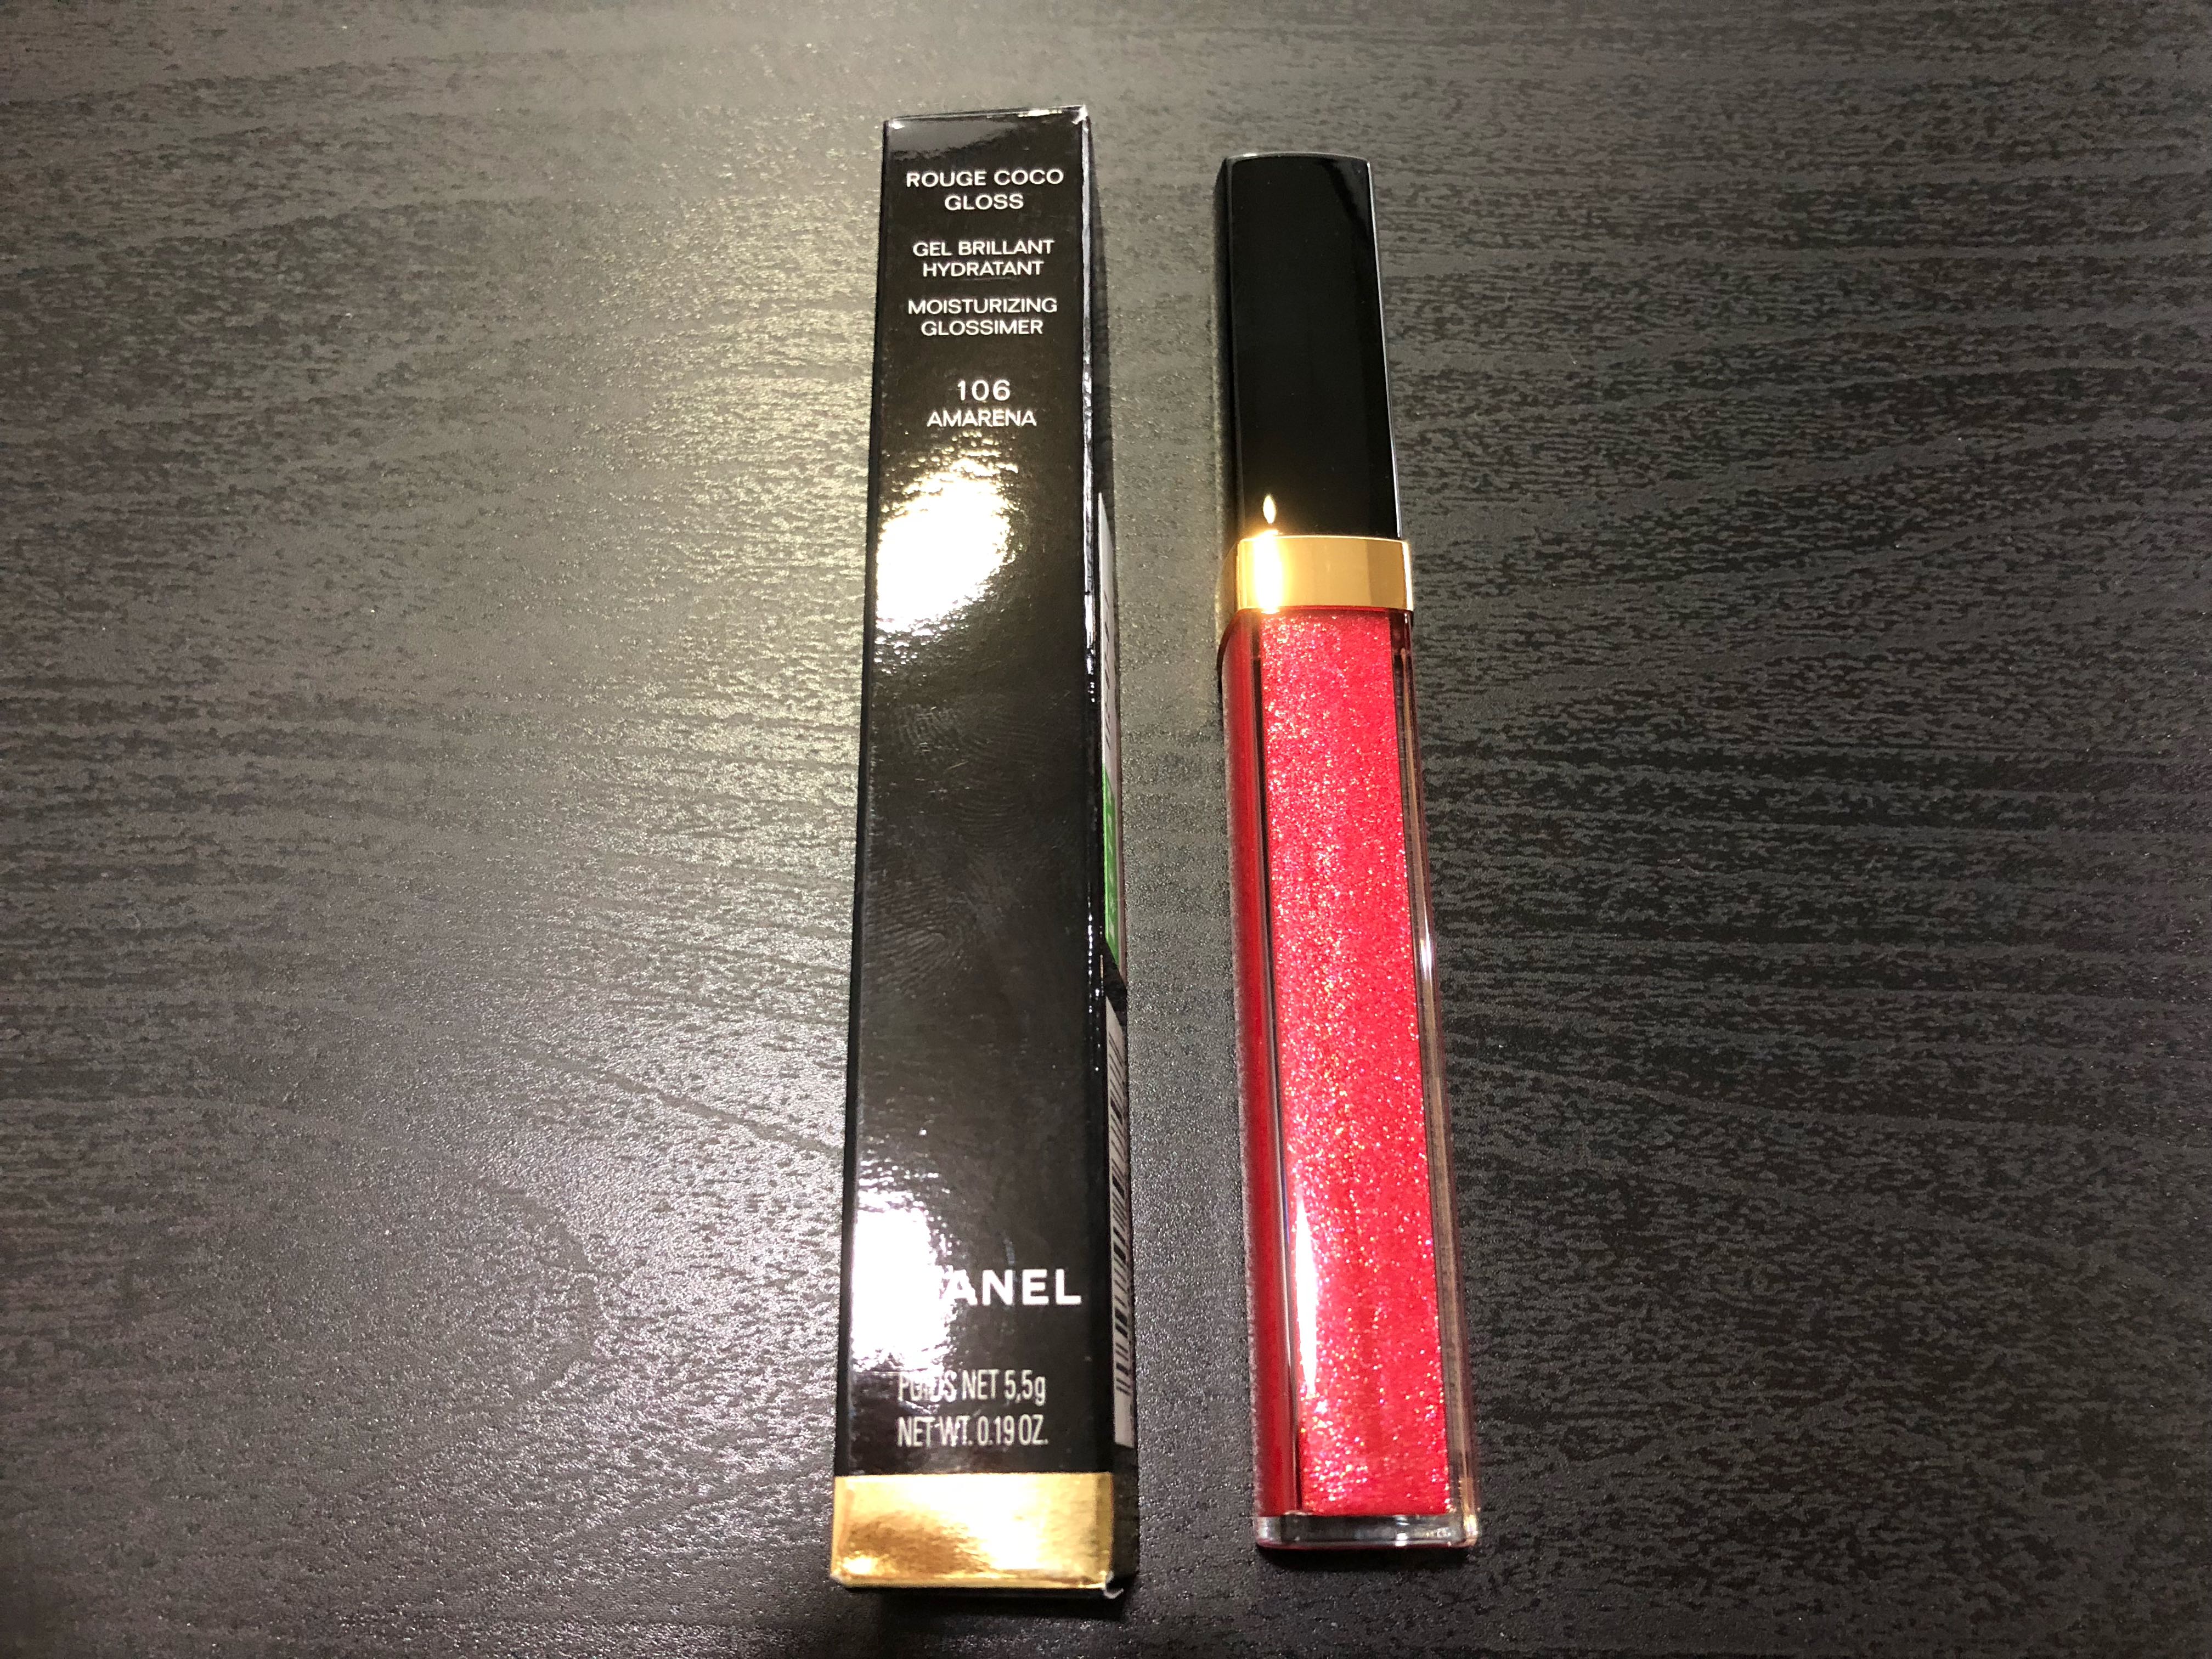 chanel rouge coco gloss 106